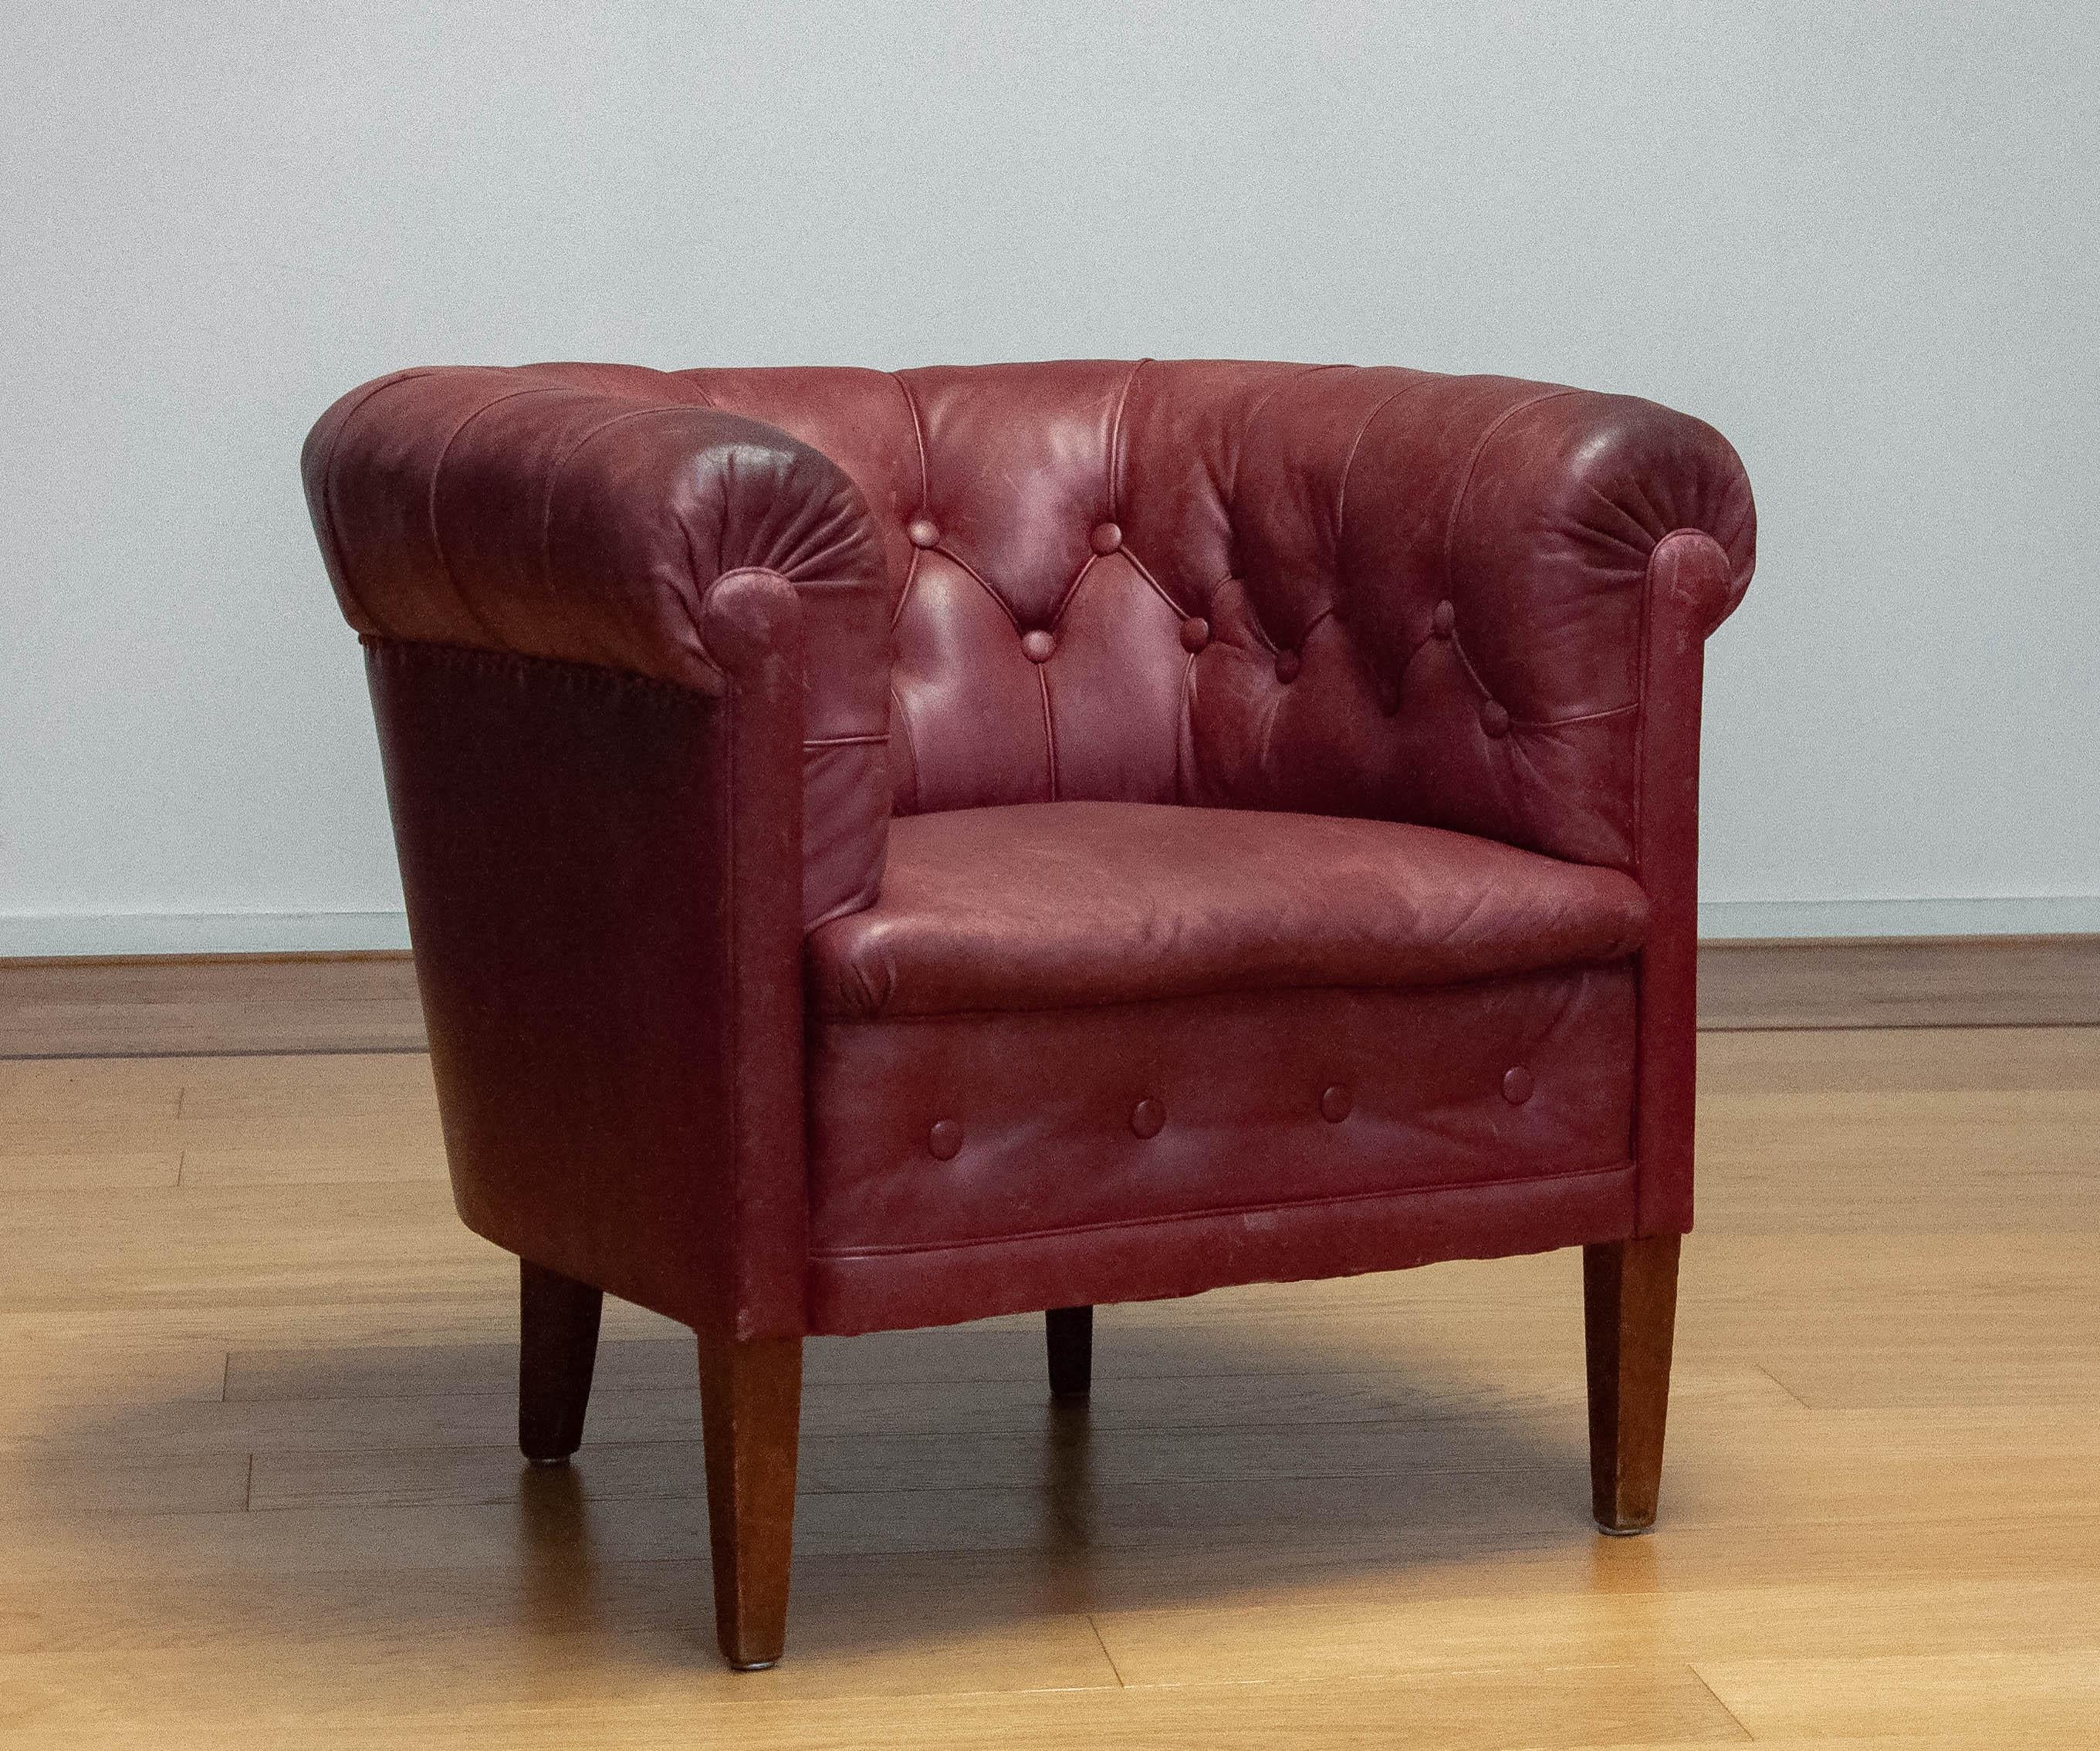 red chesterfield chair